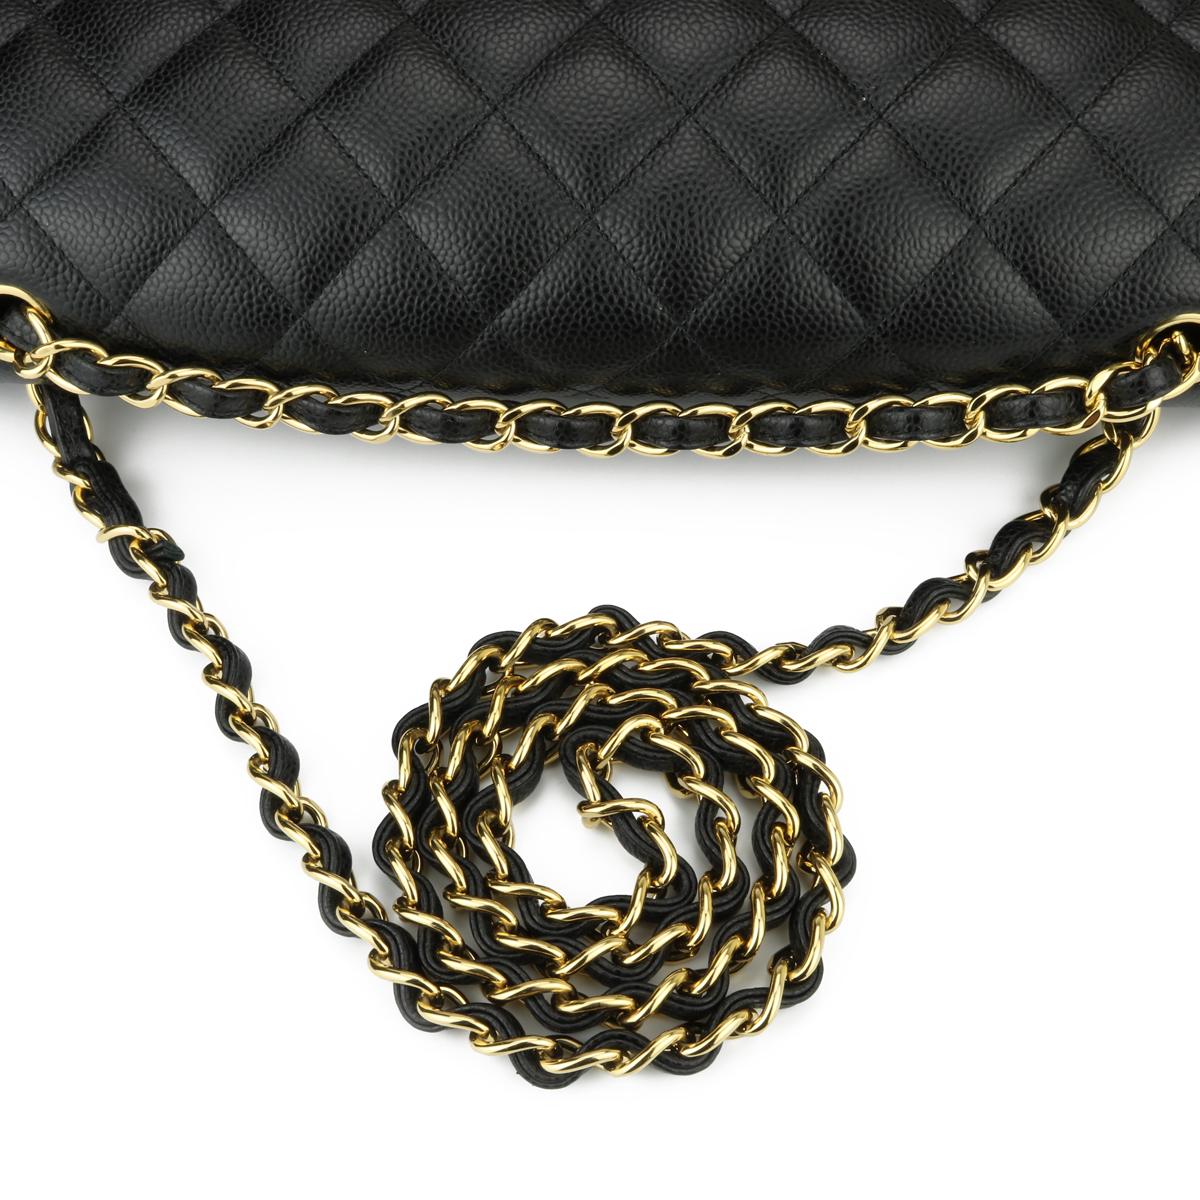 CHANEL Double Flap Maxi Bag Black Caviar with Gold Hardware 2018 8